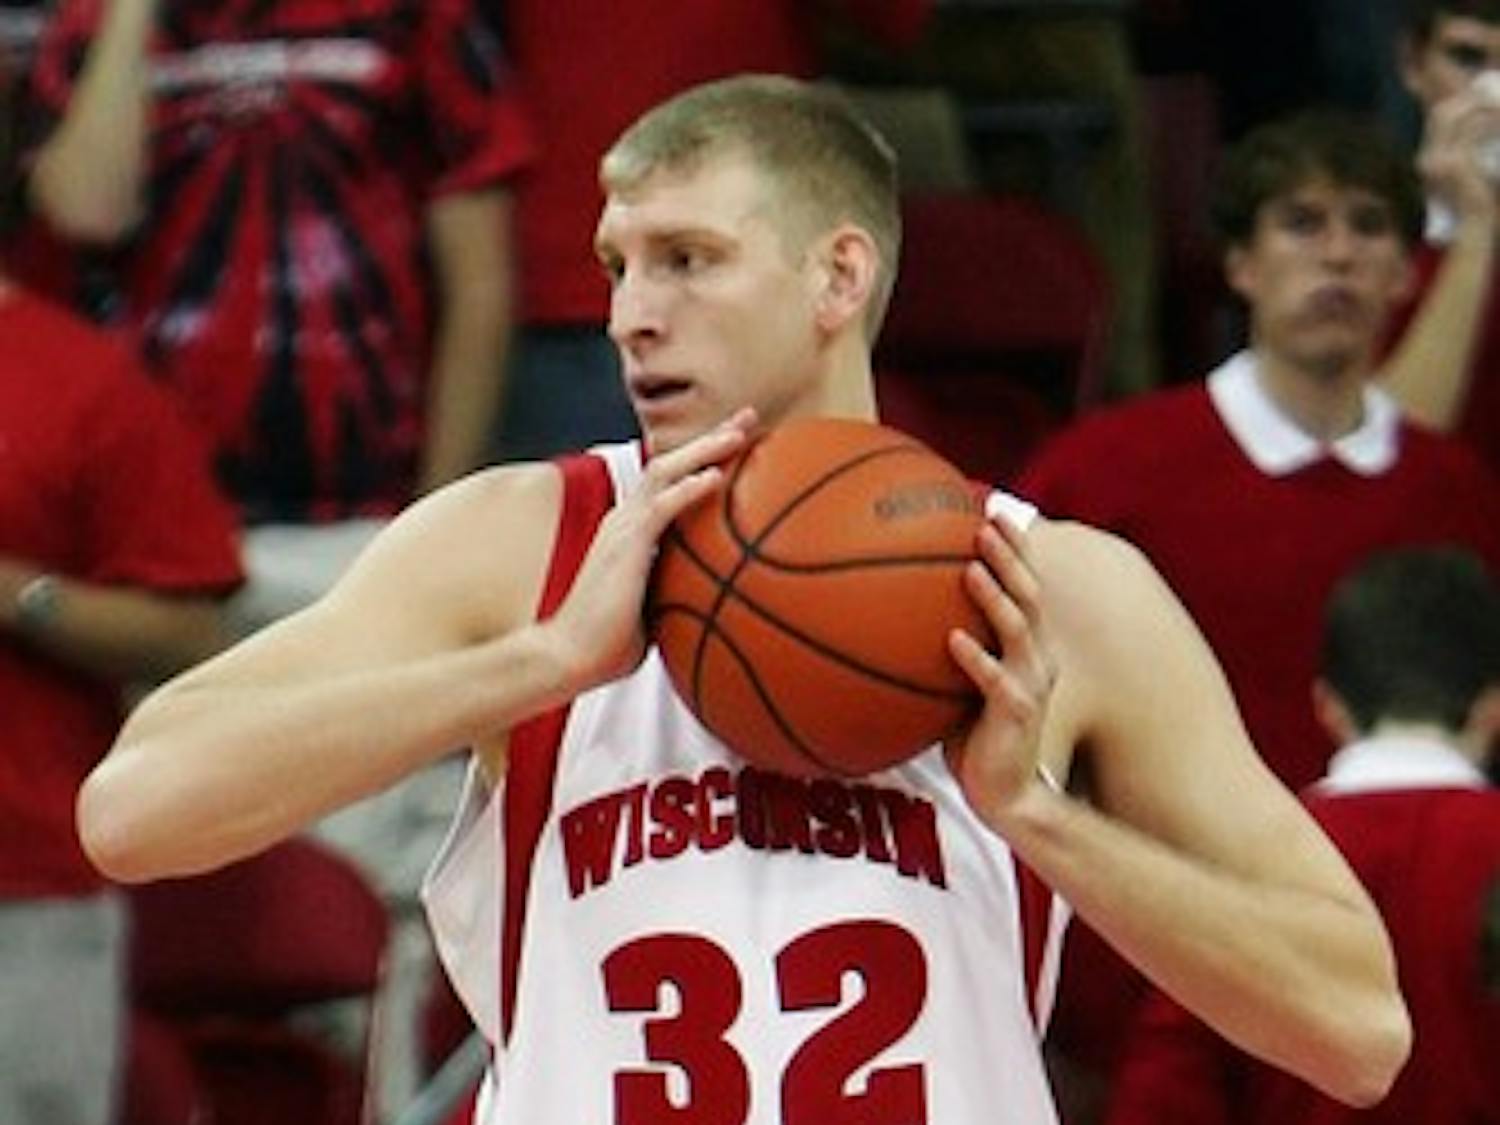 Wisconsin needs a win against Wofford